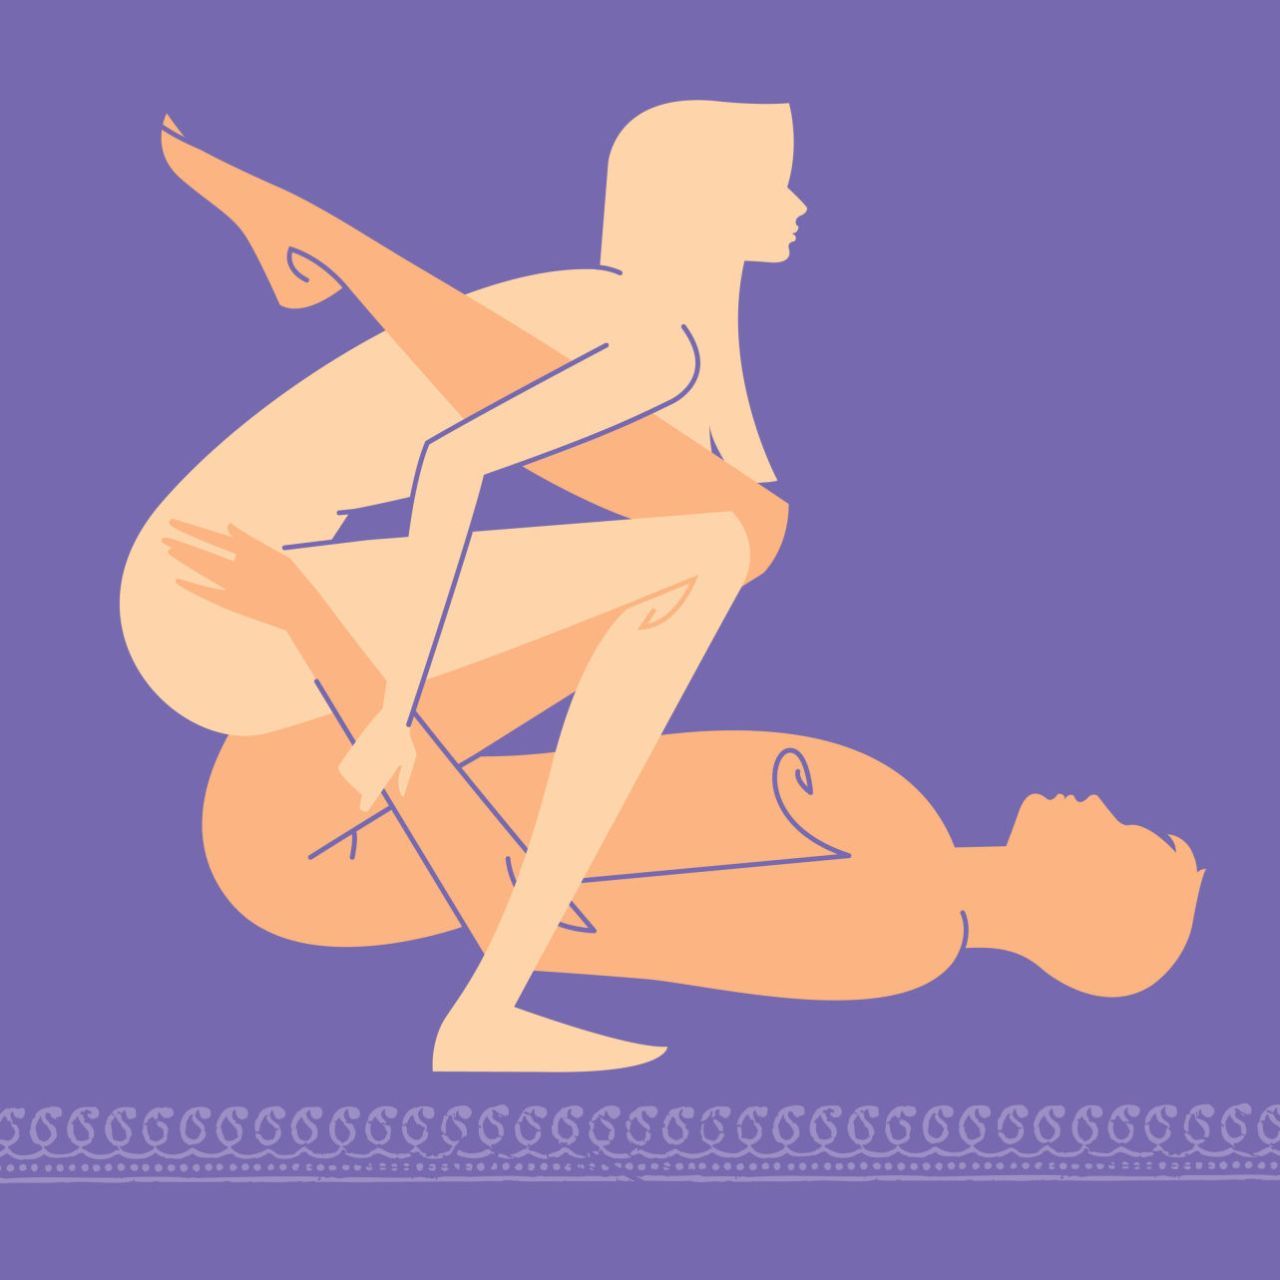 Impossible sexual position illustrations